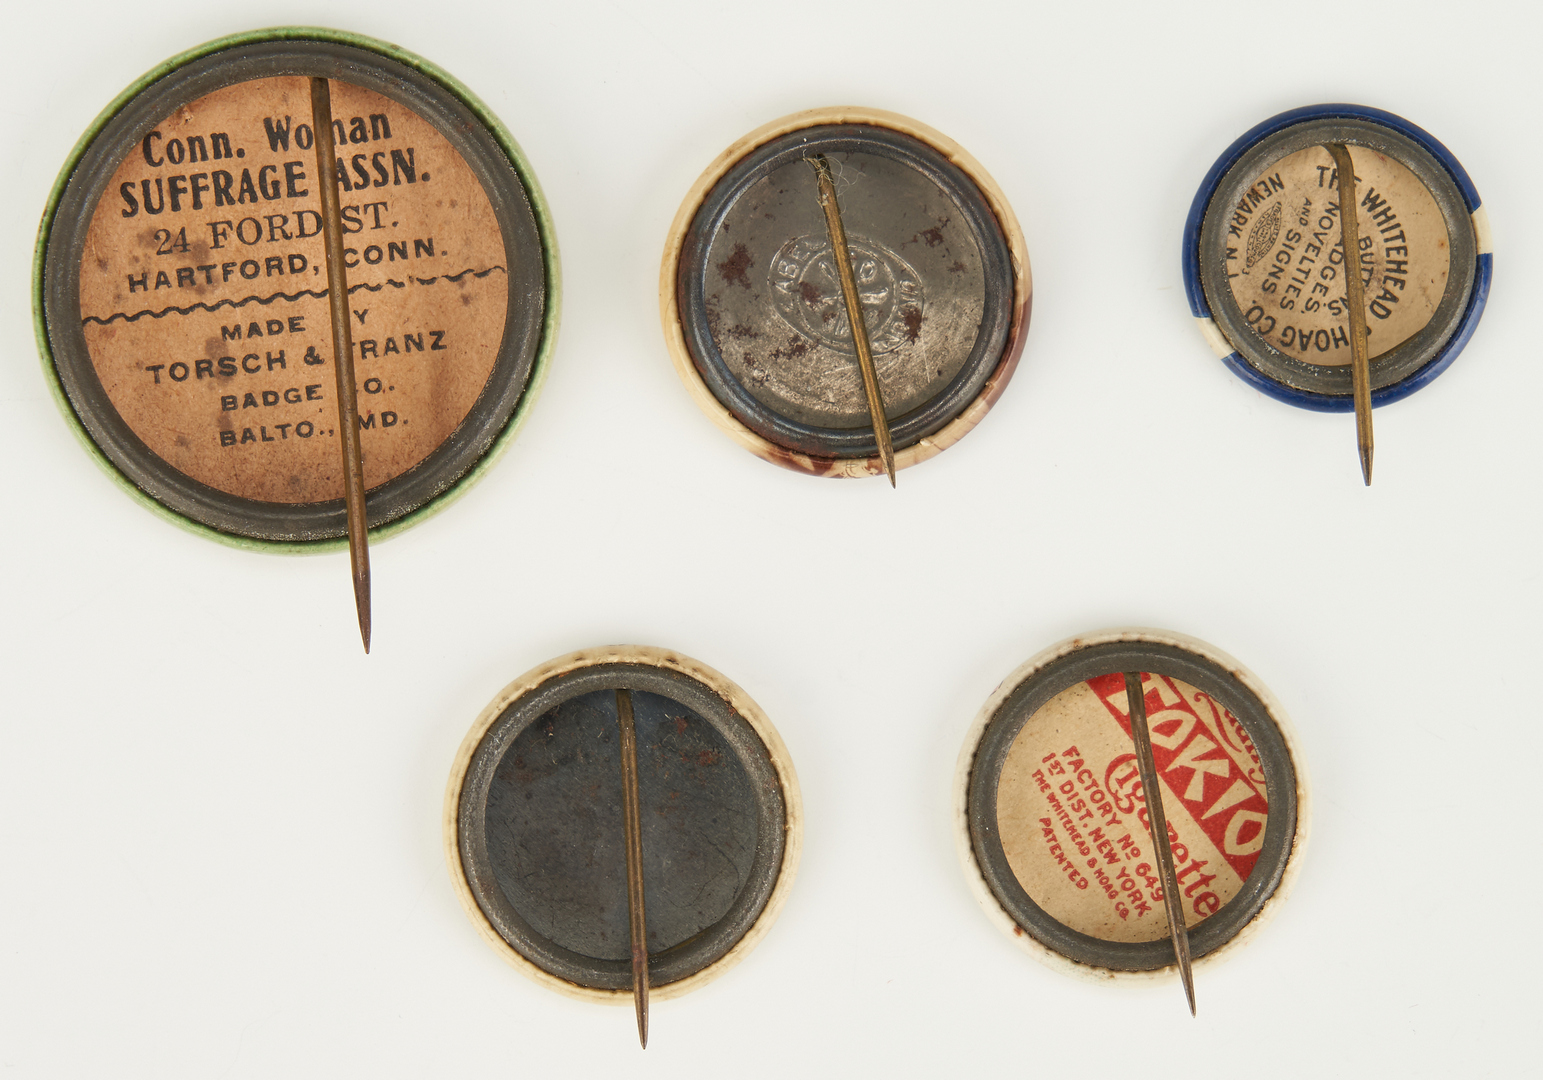 Lot 1018: 5 Women's Suffrage Buttons, incl. CWSA Votes for Women